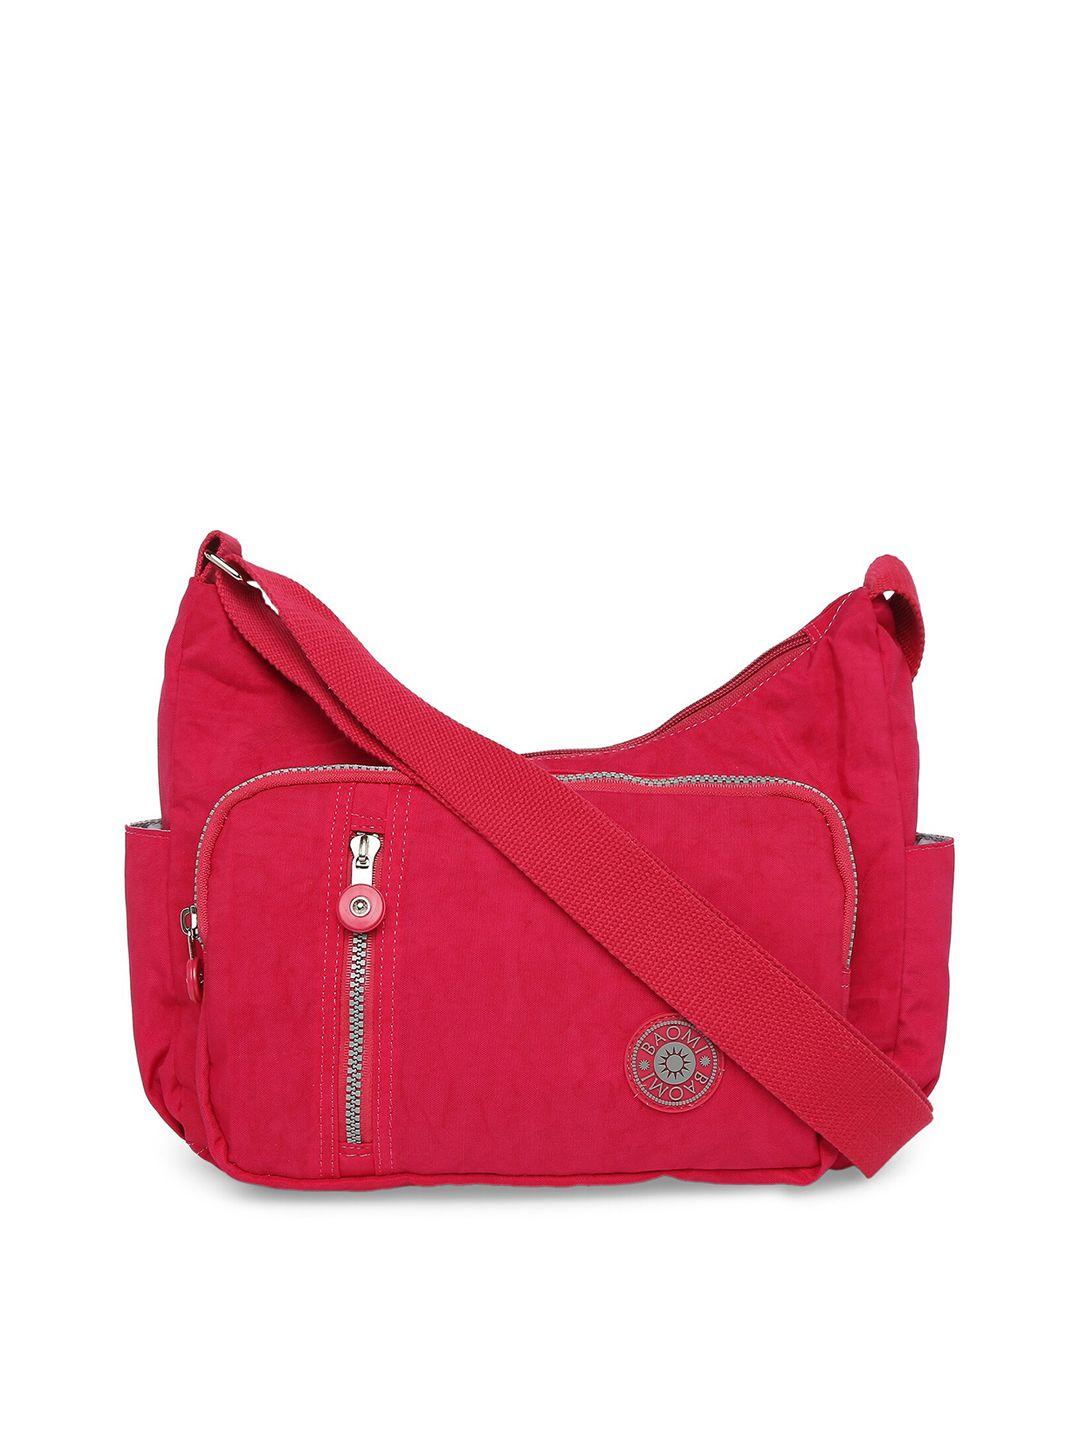 baomi red structured sling bag with applique